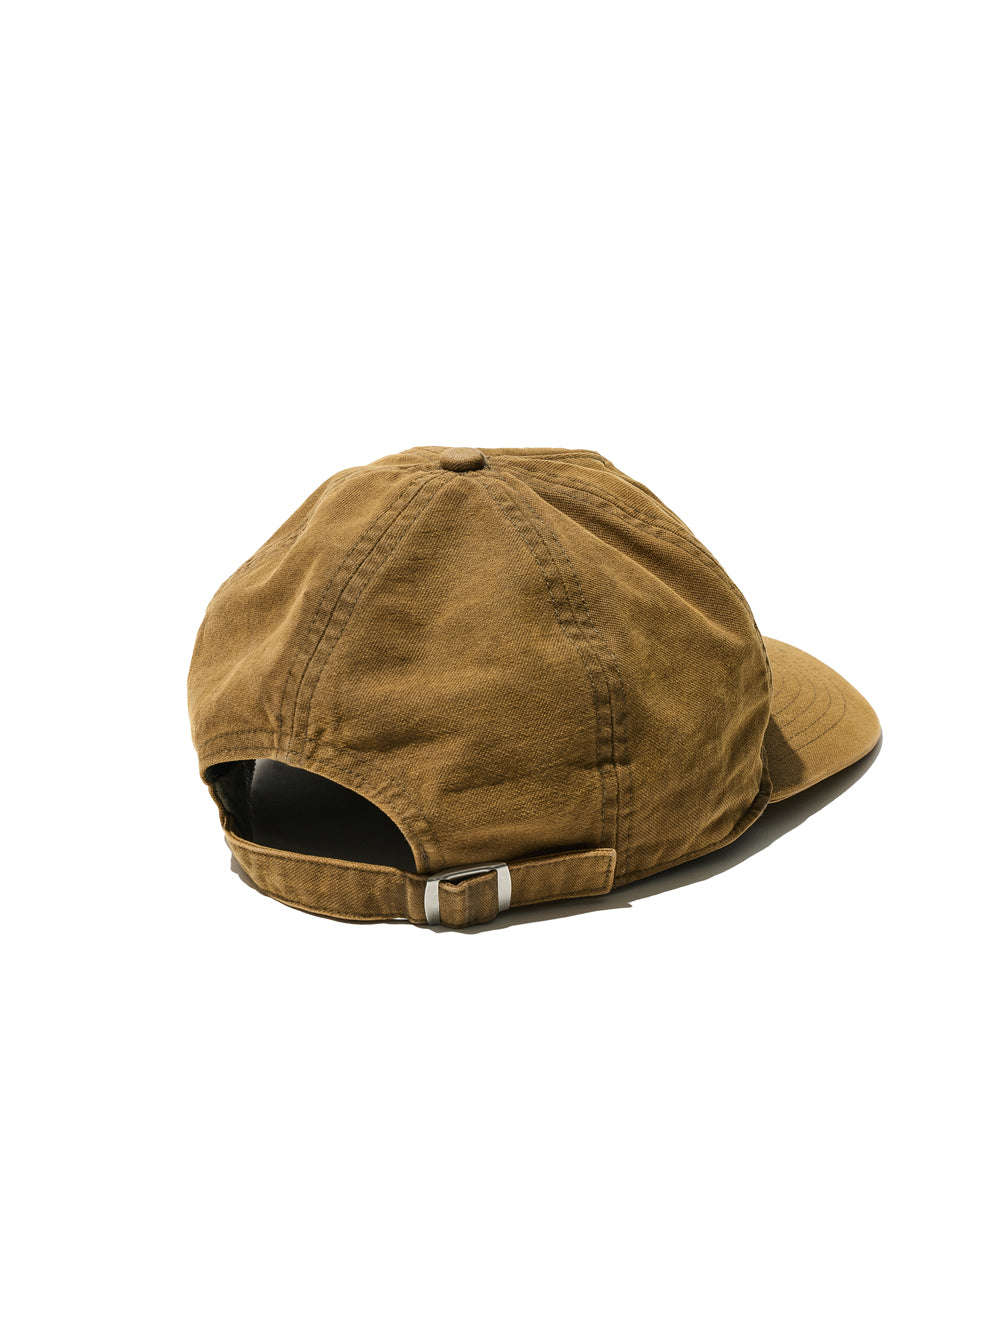 Vintage Washed Sunlight Ball Cap in Brown Khaki